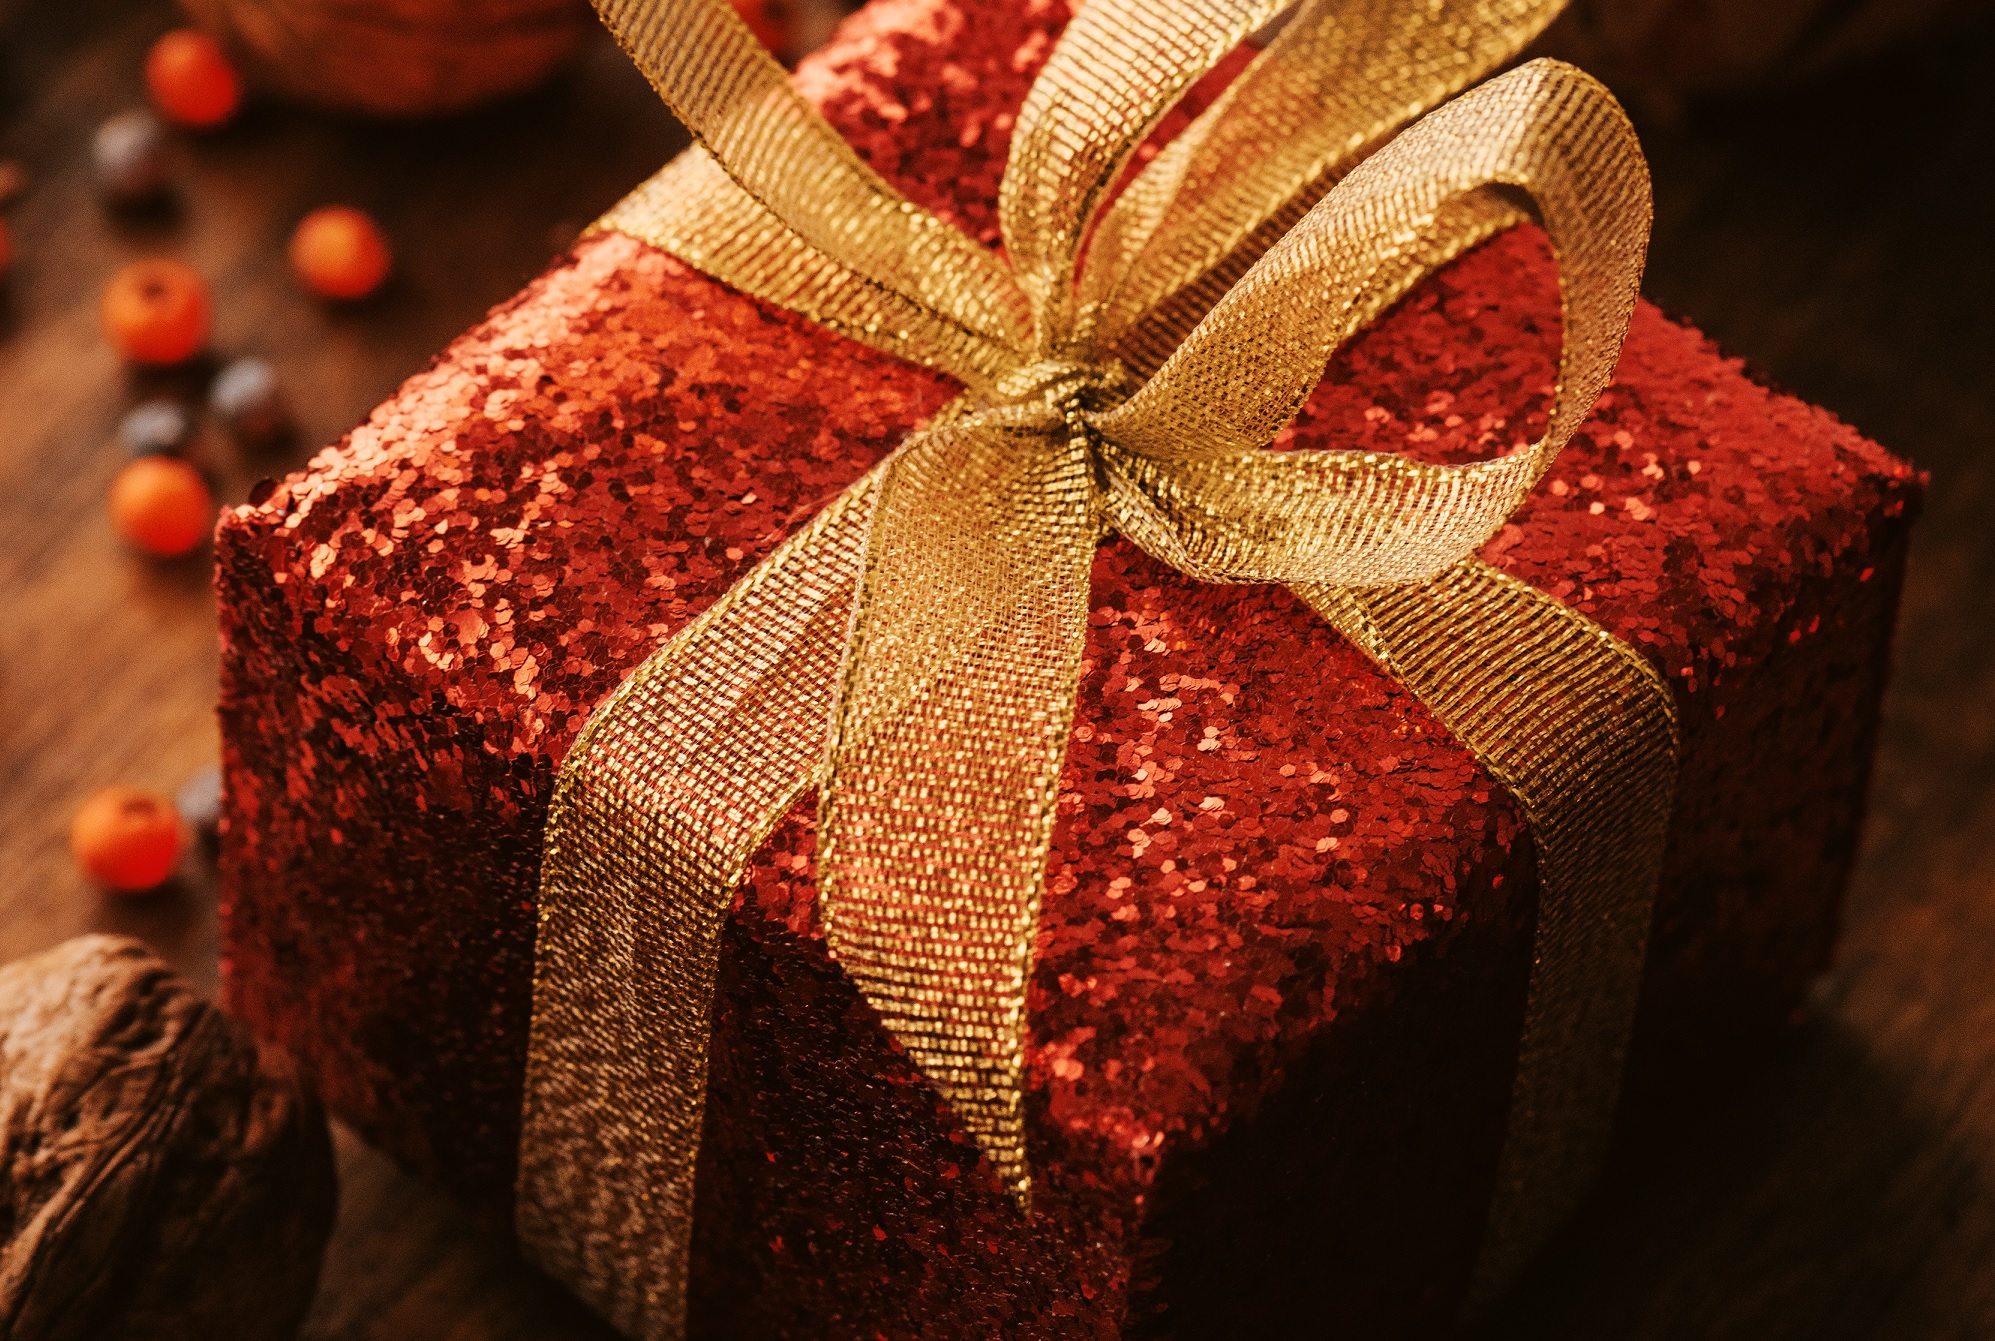 Christmas checklist: The best way to make your brand season-ready